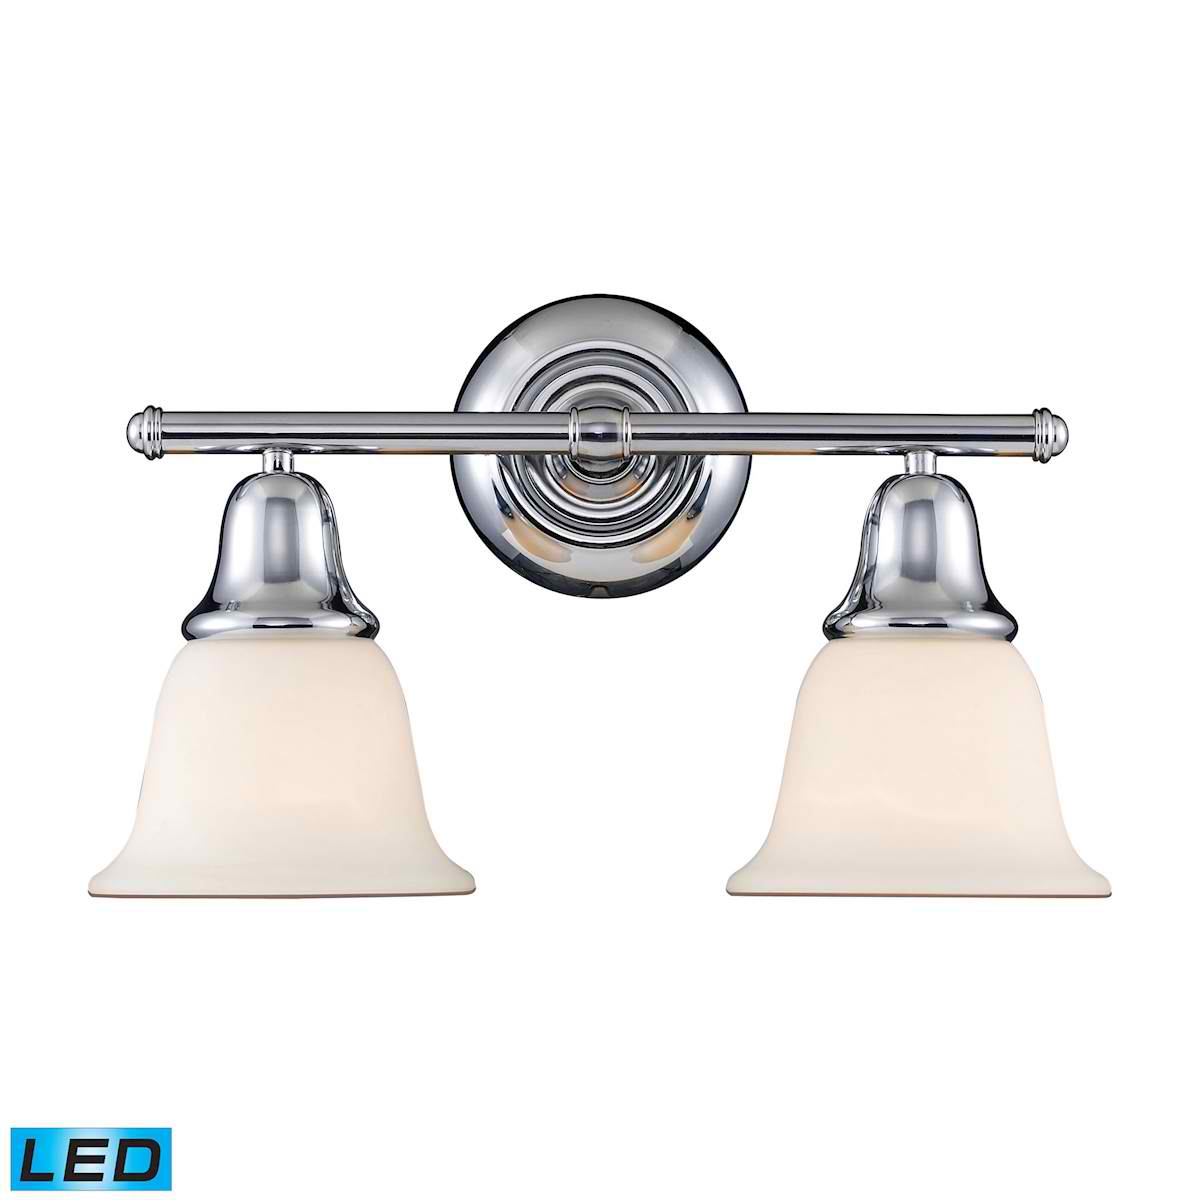 Berwick 2-Light Vanity in Polished Chrome - LED, 800 Lumens (1600 Lumens Total) with Full Scale Dimm